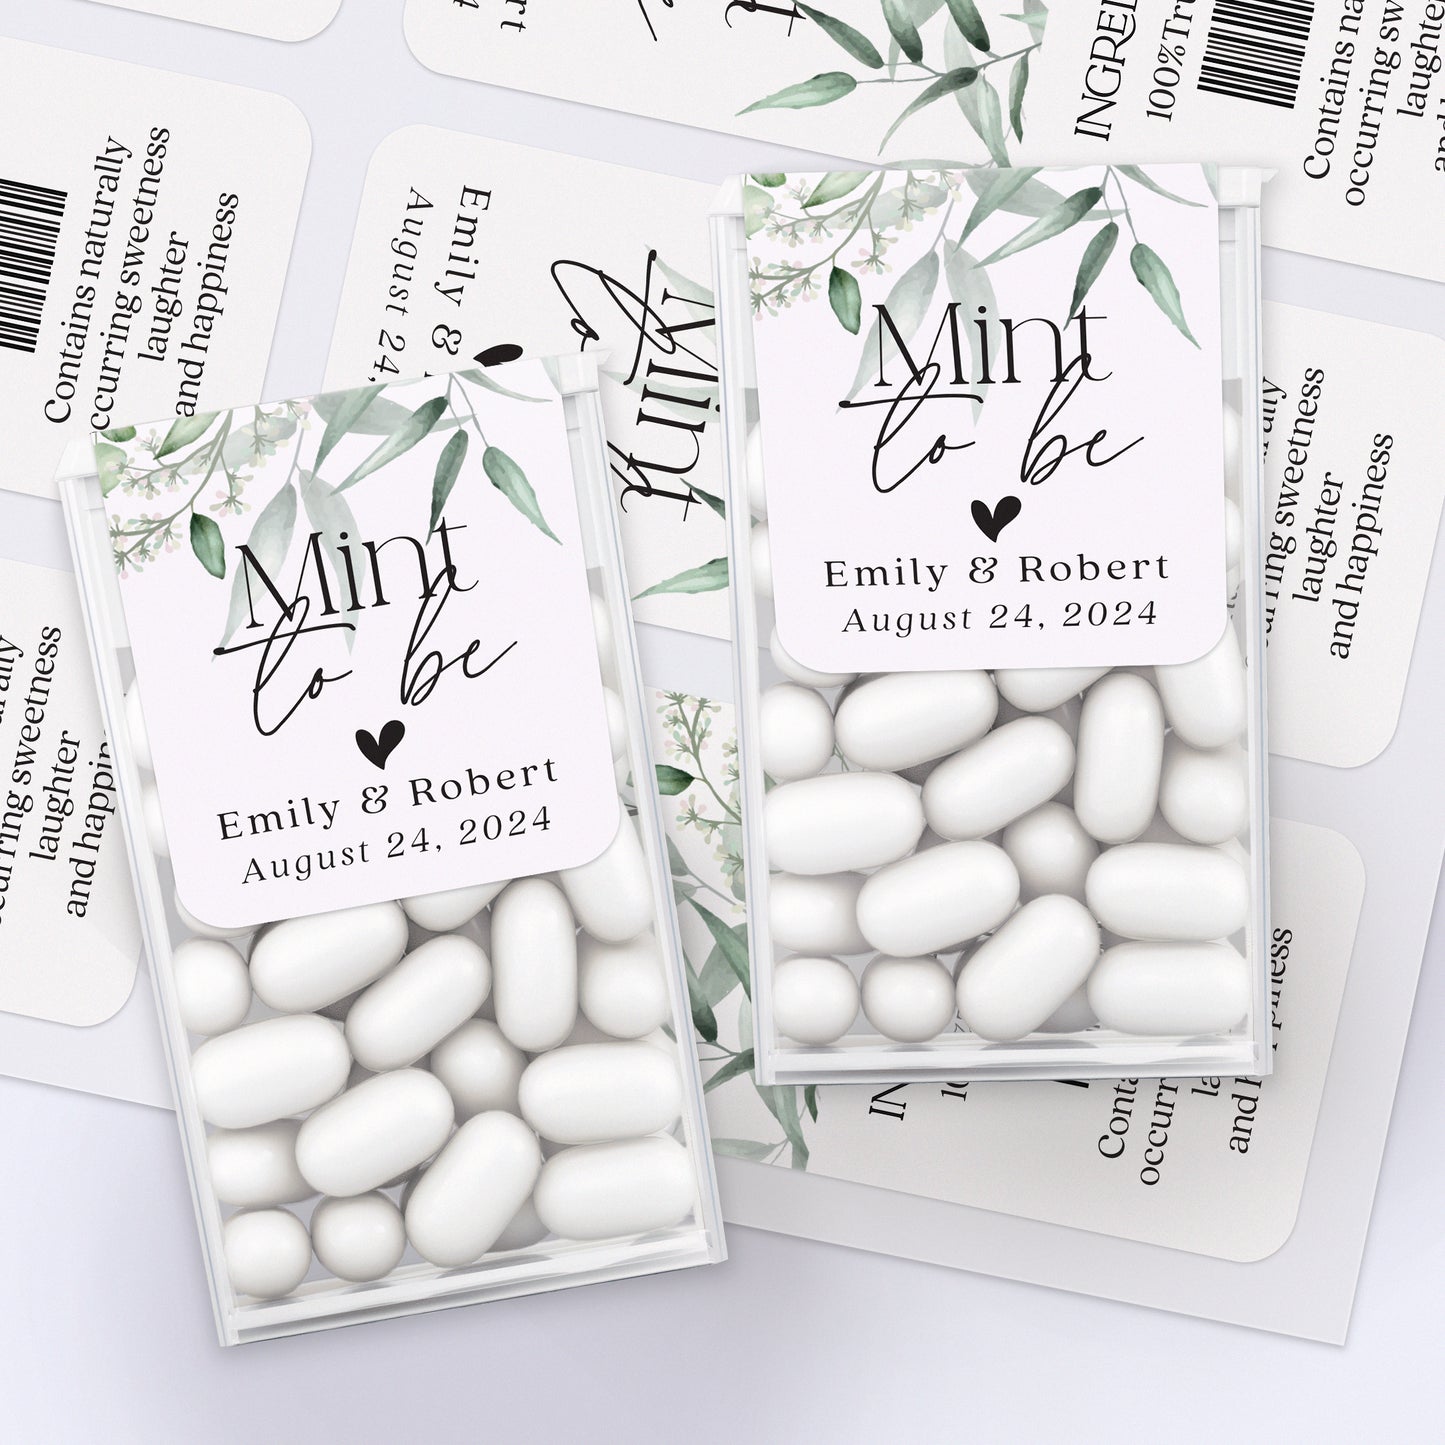 greenery wedding favor sticker with mint to be design, to use with tic tac boxes - XOXOKristen